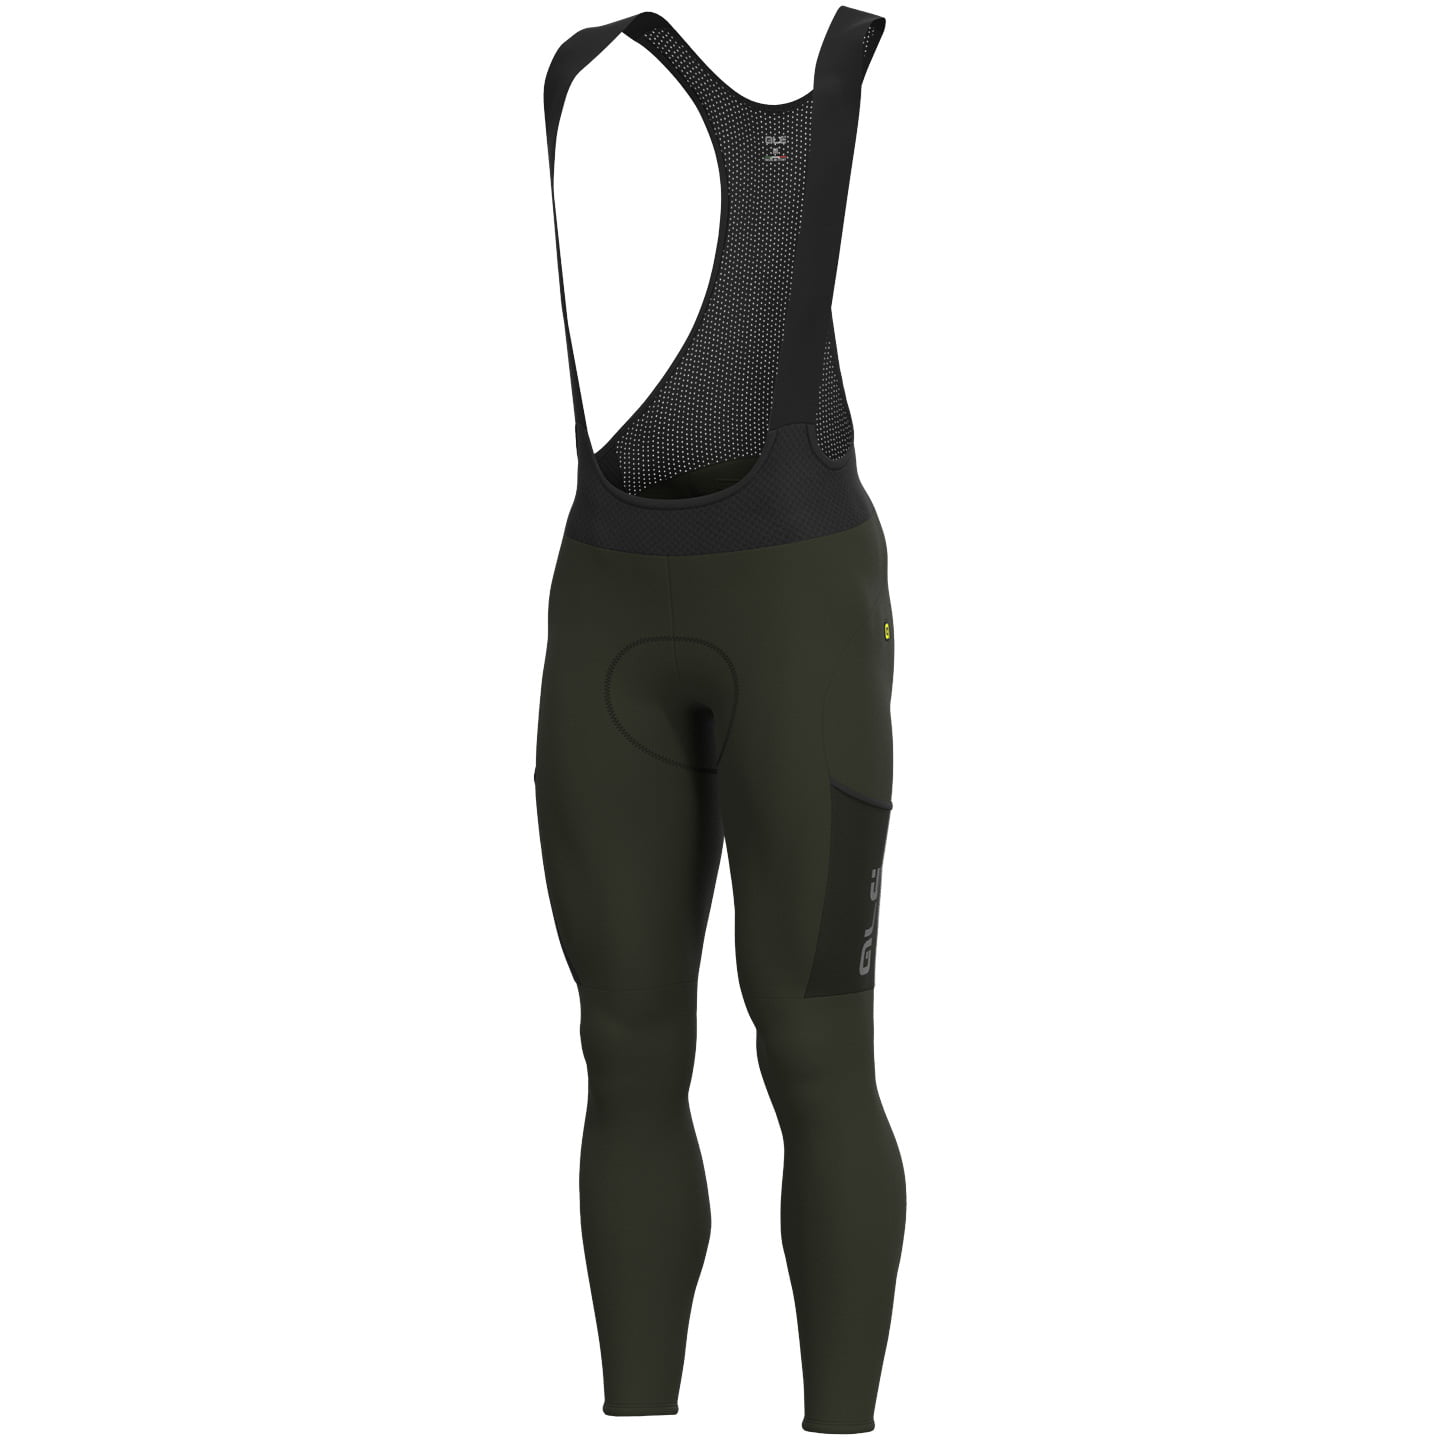 ALE Stones Cargo Bib Tights Bib Tights, for men, size XL, Cycle tights, Cycling clothing